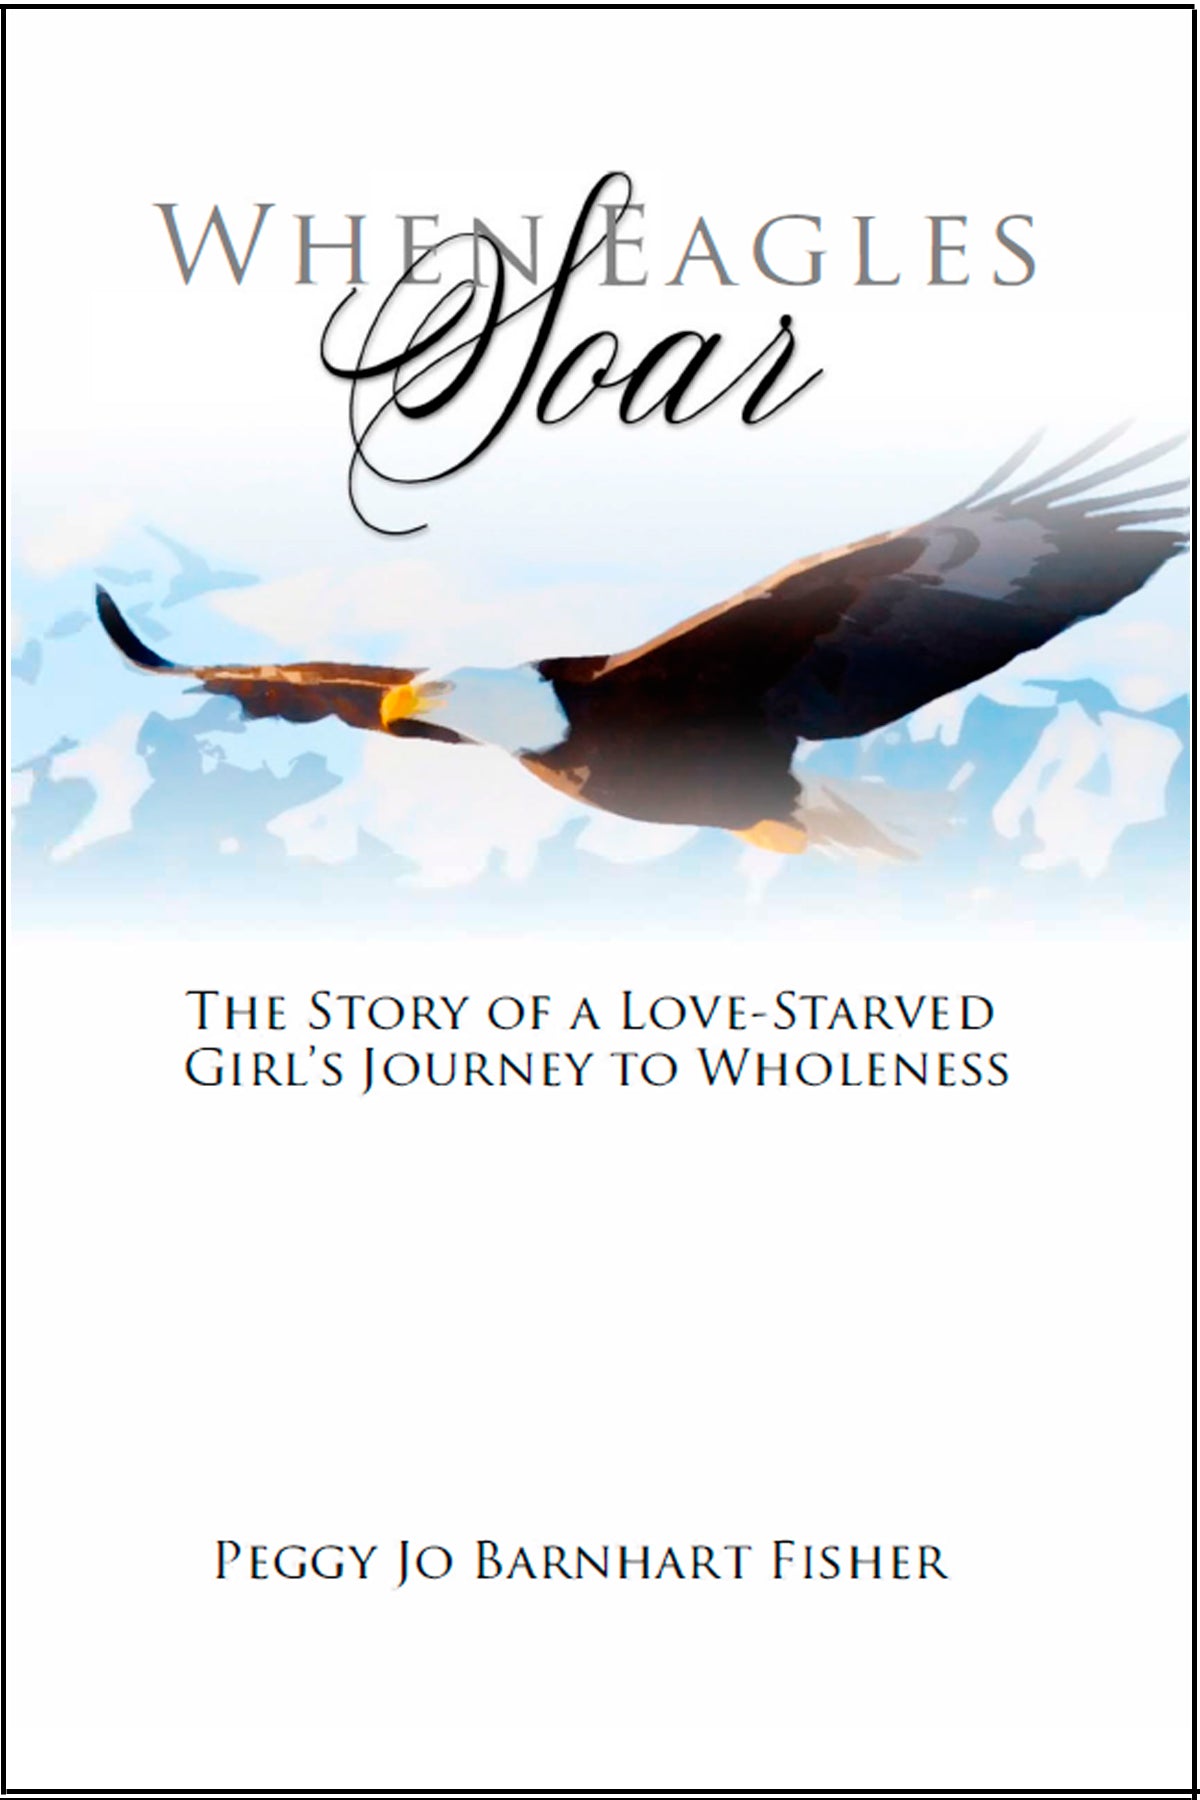 When Eagles Soar: The Story of a Love-Starved Girl's Journey to Wholeness